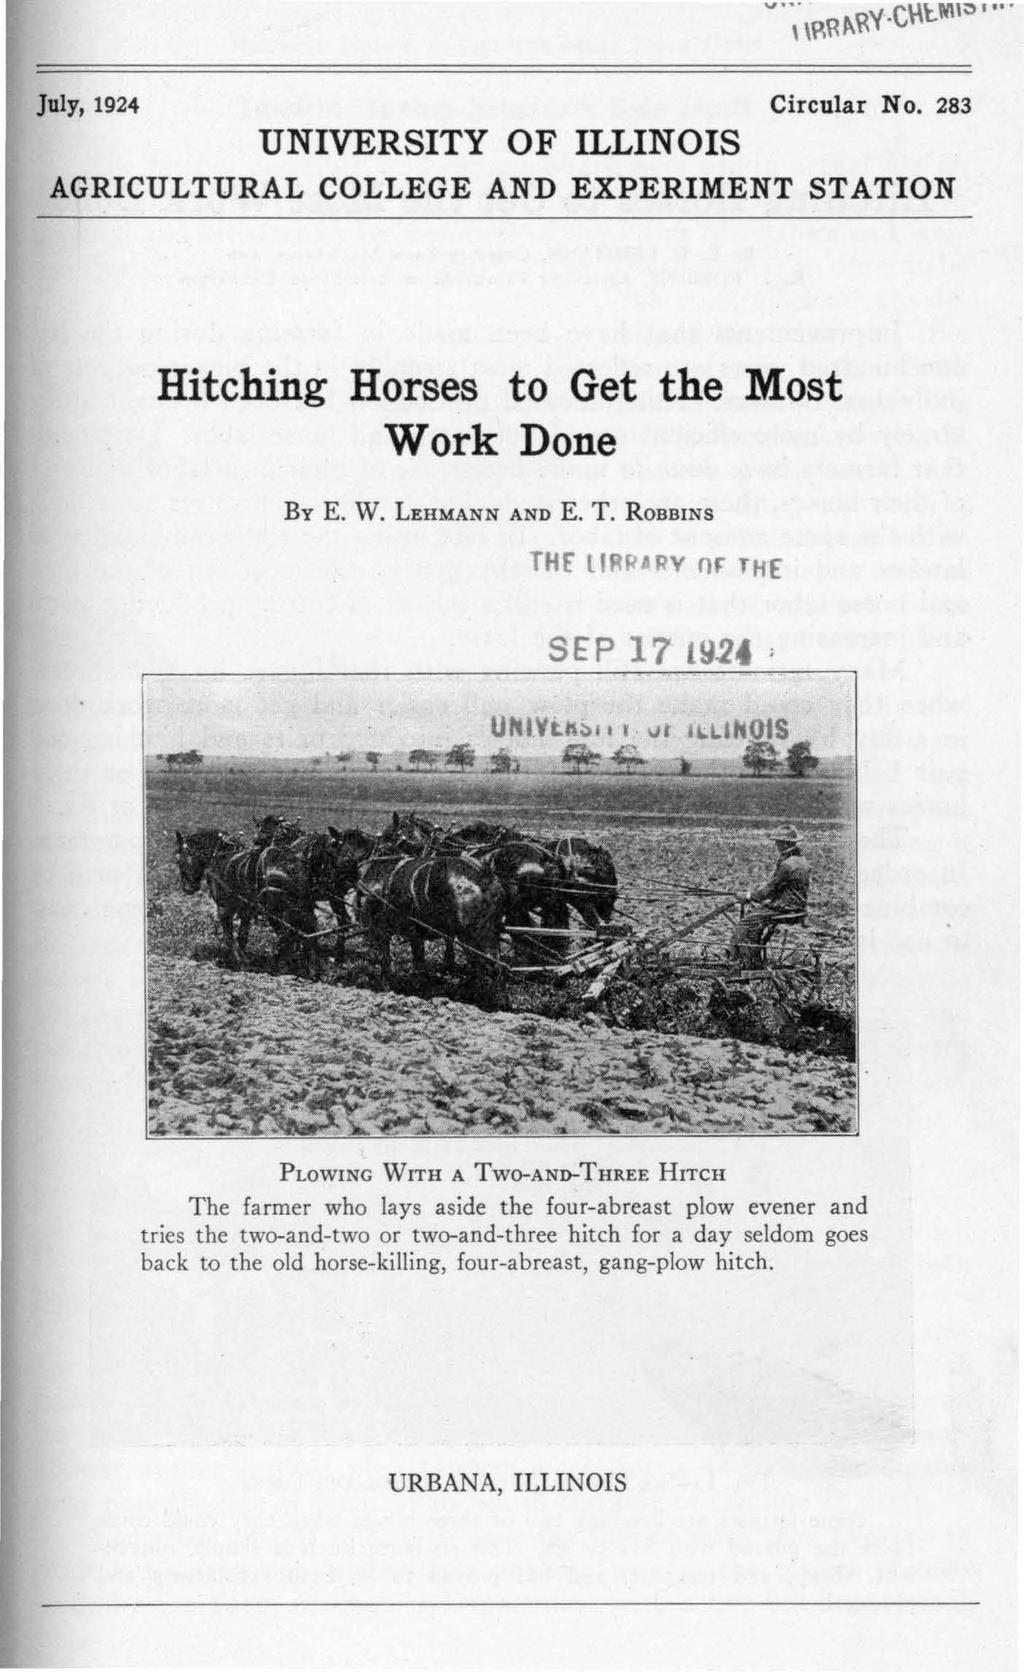 July, 1924 Circular No. 283 UNIVERSITY OF ILLINOIS AGRICULTURAL COLLEGE AND EXPERIMENT STATION Hitching Horses to Get the Most Work Done BY E. W. LEHMANN AND E. T.